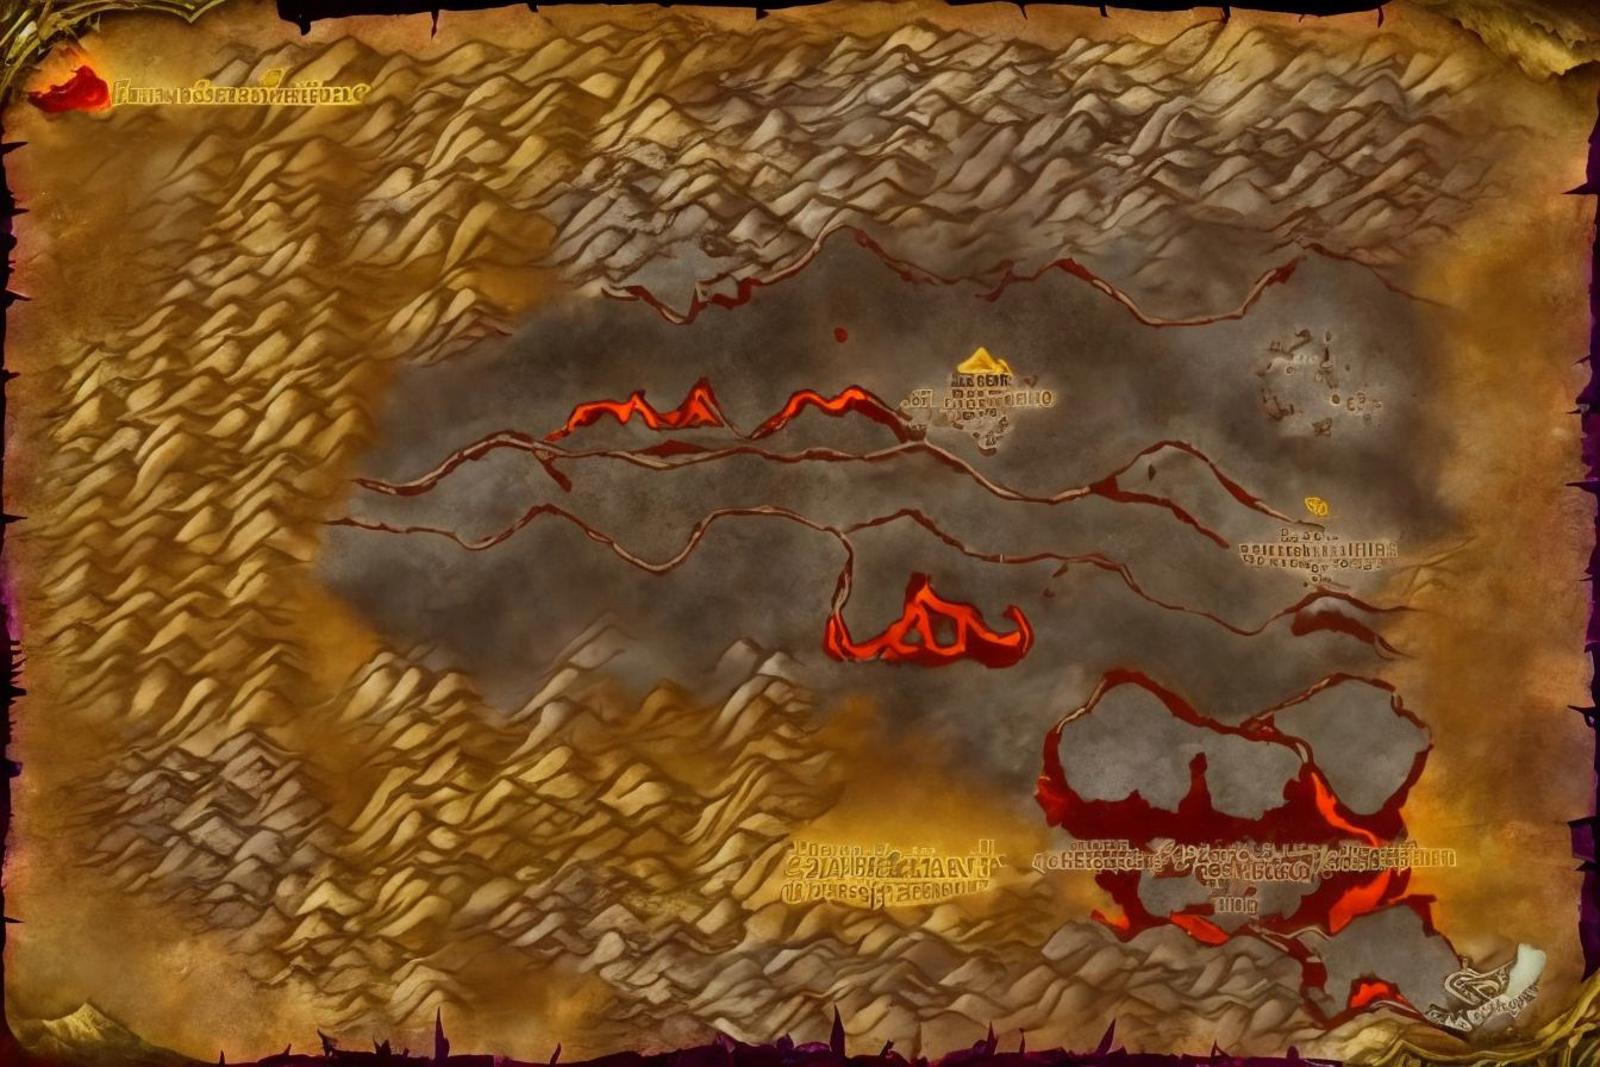 Vanilla WoW maps image by bomber055